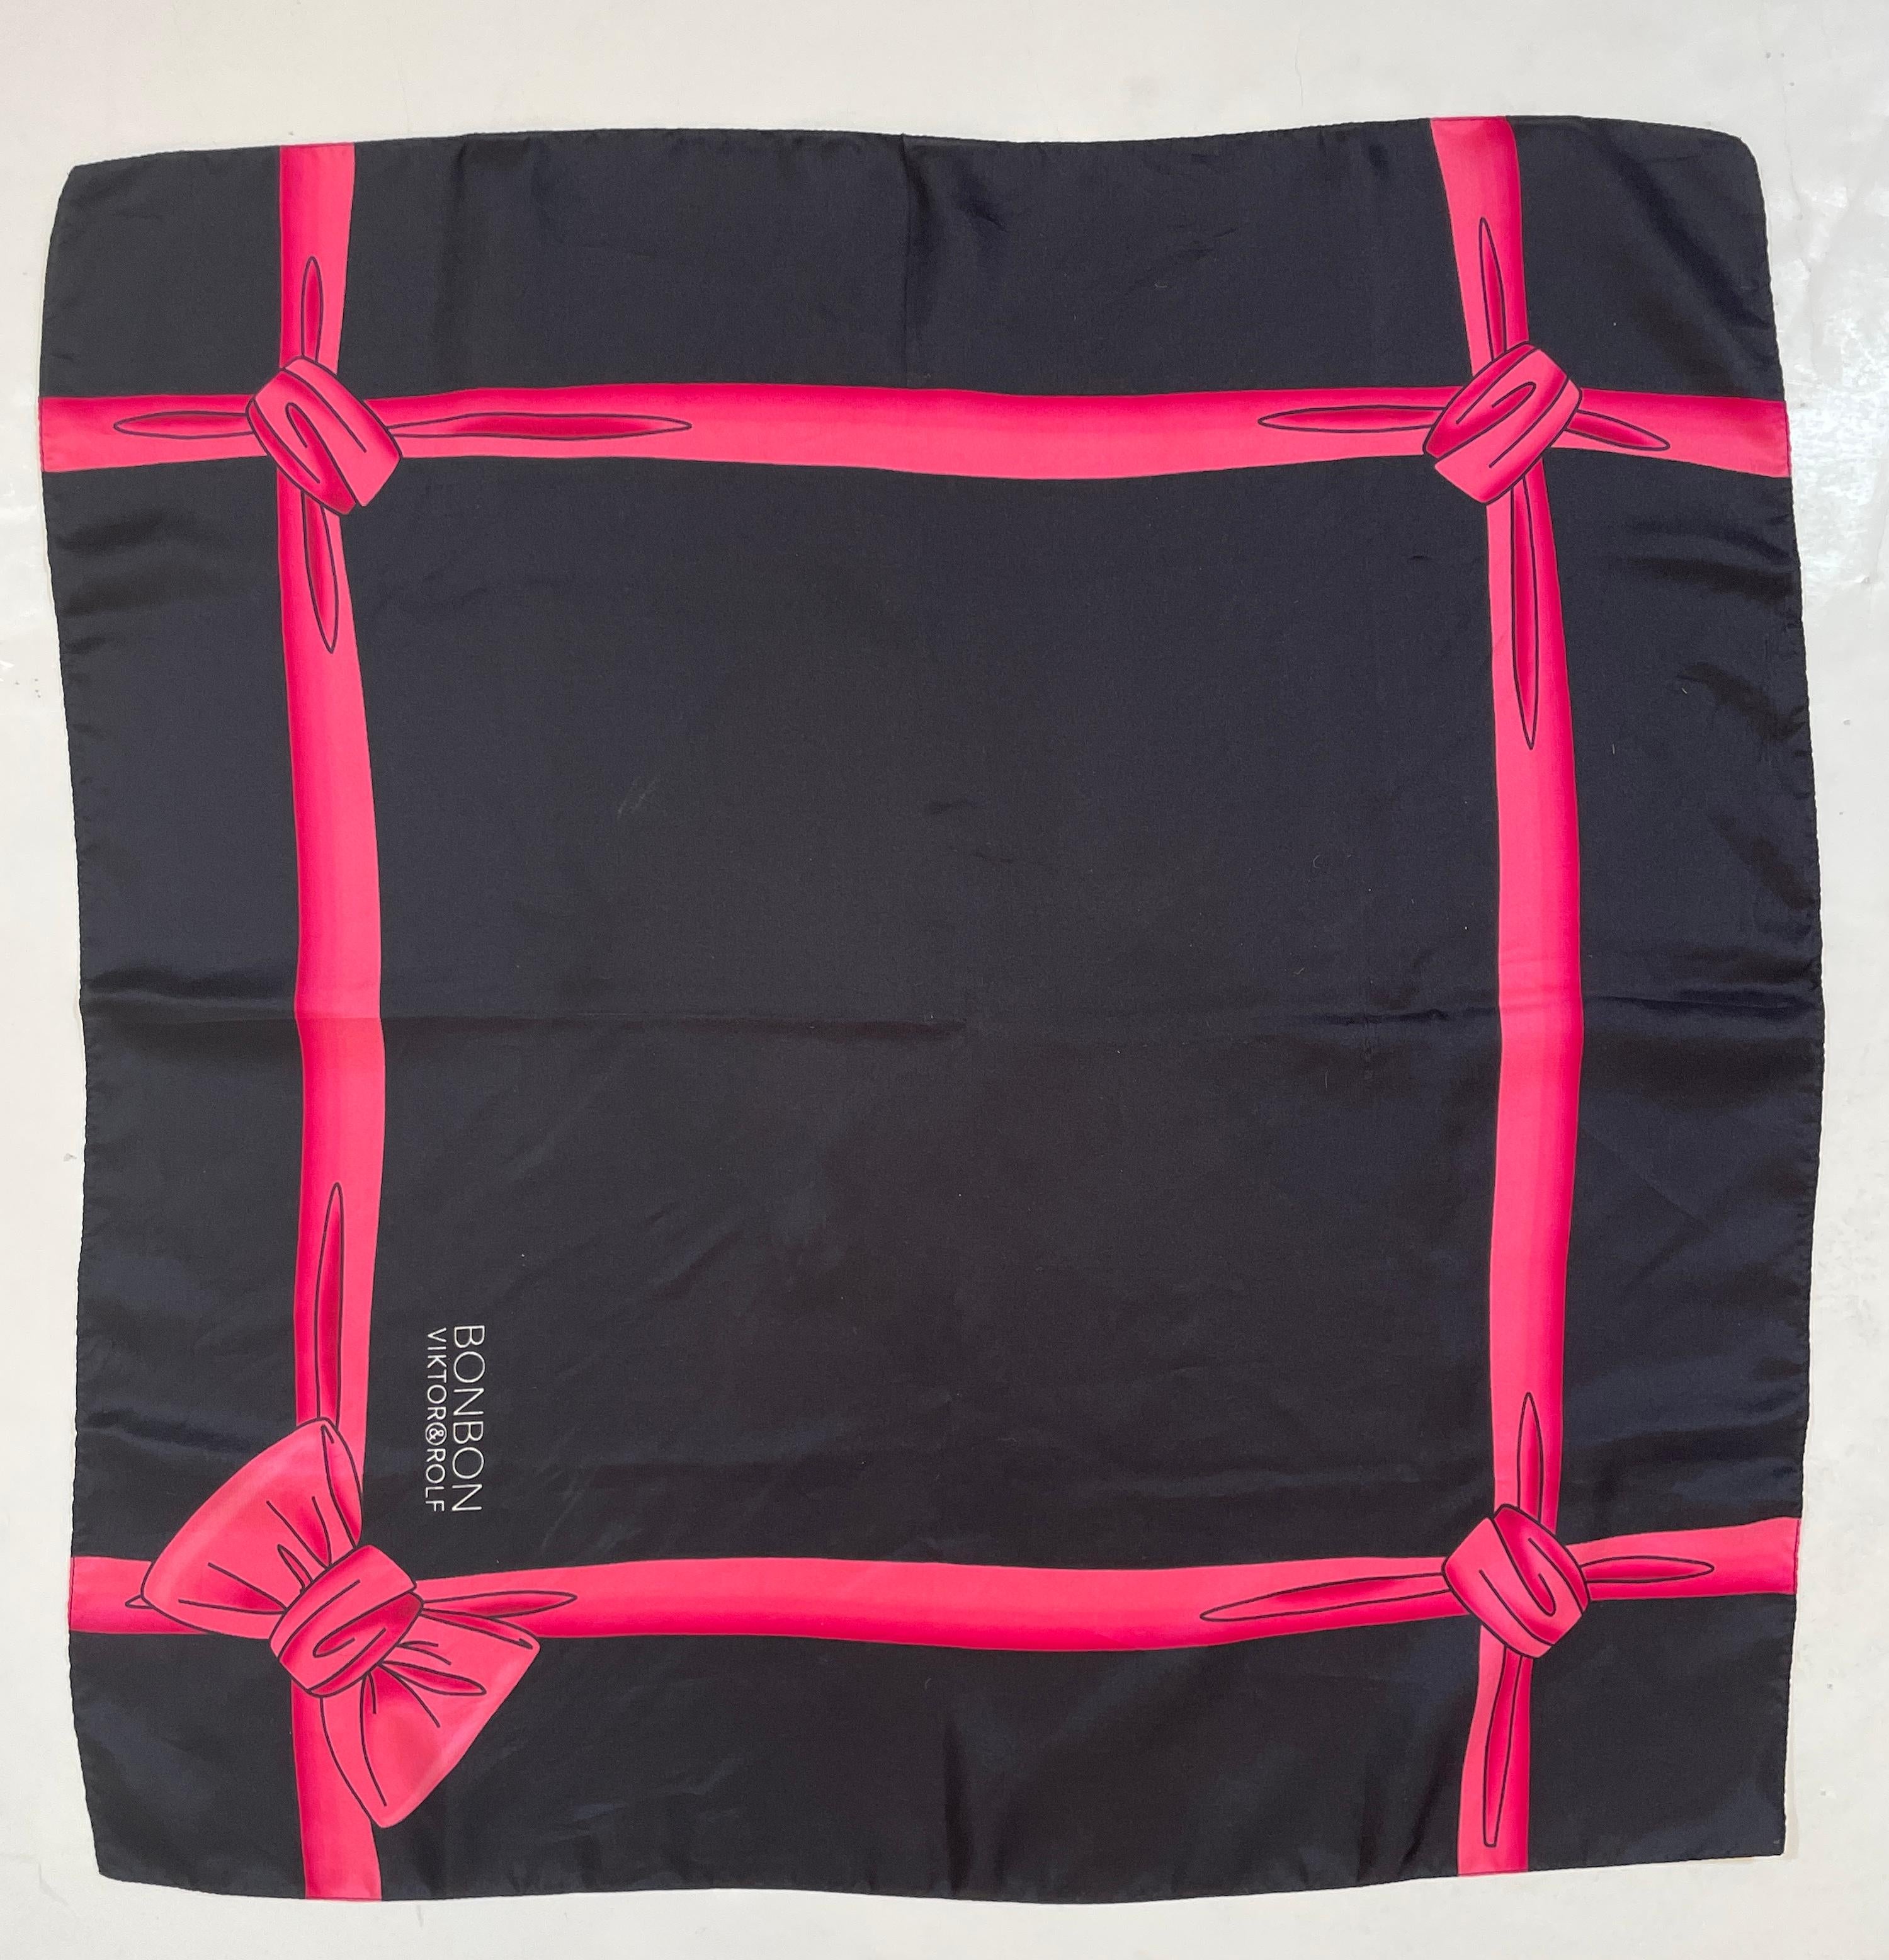 Viktor & Rolf Silk Square Scarf.
Bonbon Viktor & Rolf Silk Square neckerchief black with hot fuschia pink ribbon.
Dimensions: 24 in. x 24in.
100% Silk Made in Italy.
Condition: Some pull up thread.
Women Accessories Silk Scarves by Designer Viktor &